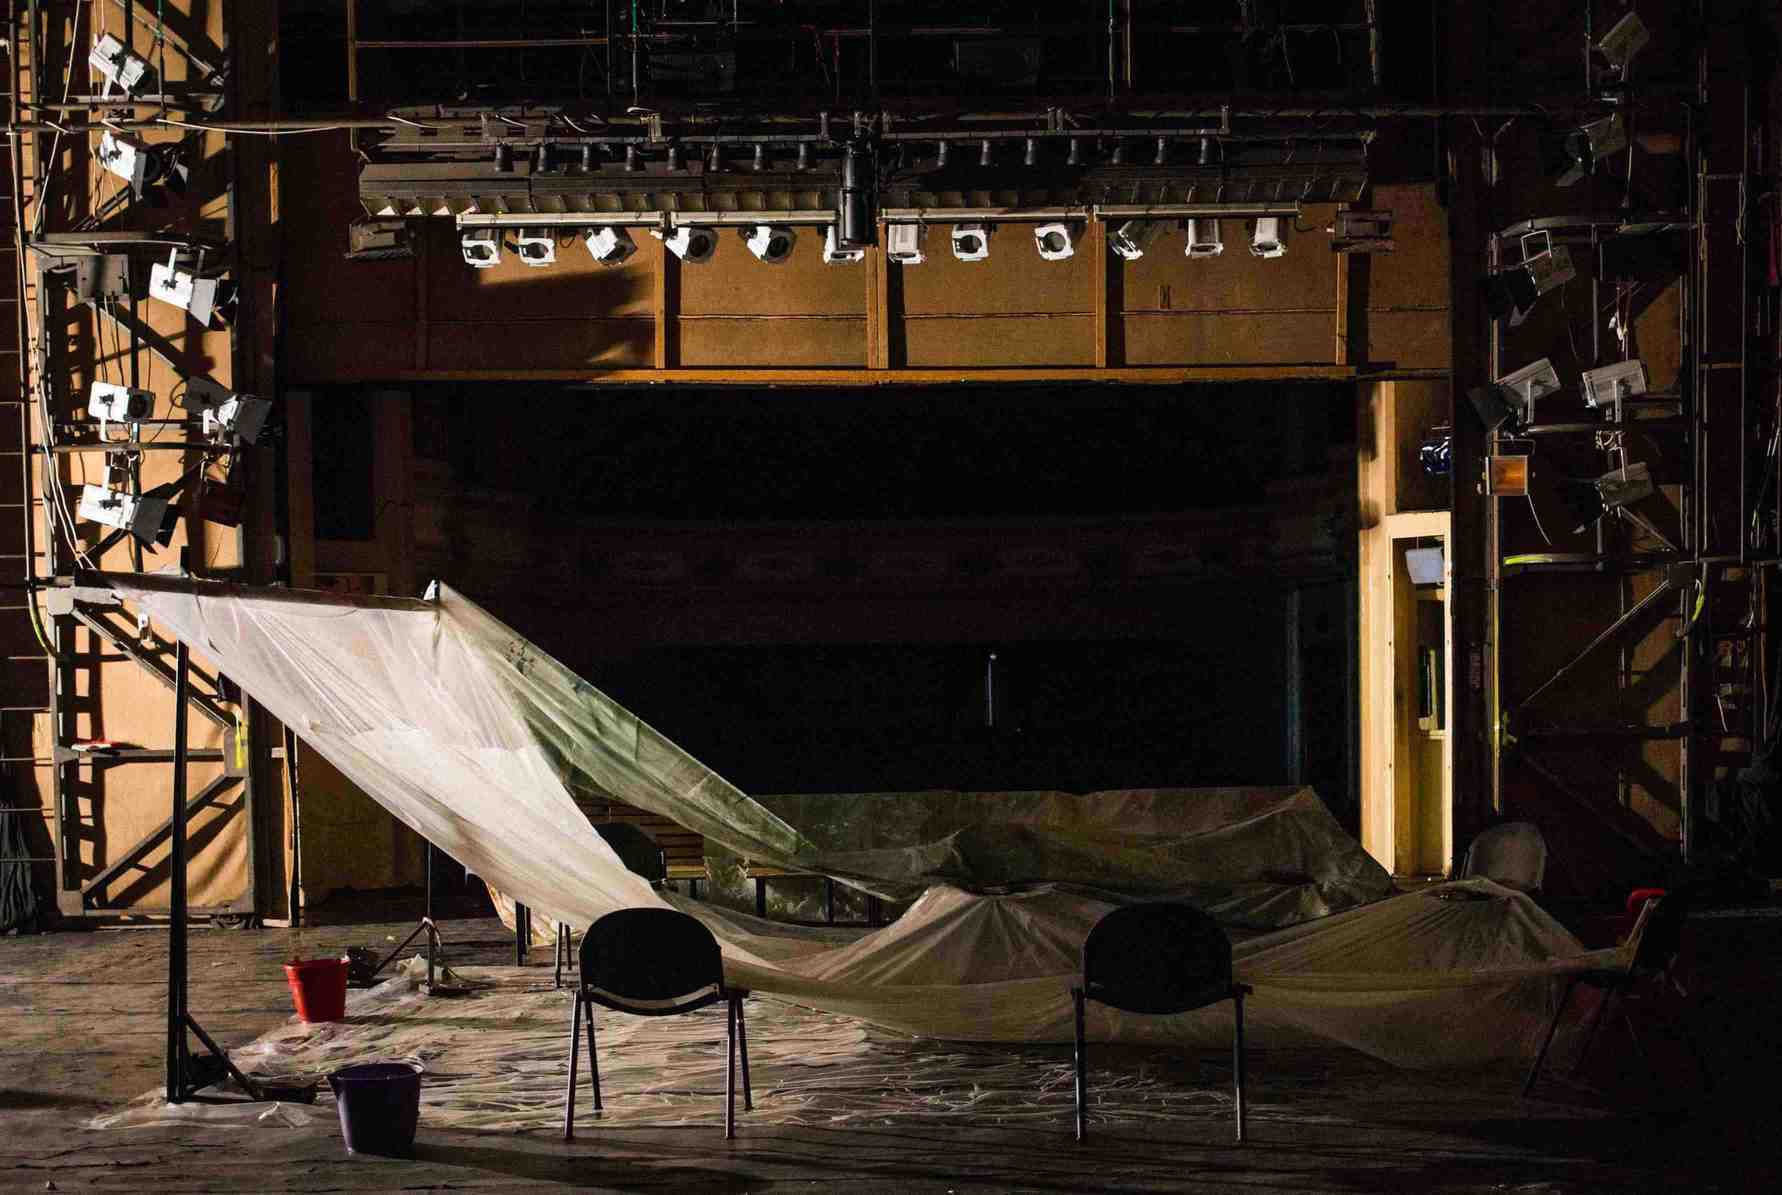 Over six decades of Yiddish theater, the stage is now hosting a tarpaulin to catch leaking water from a busted roof